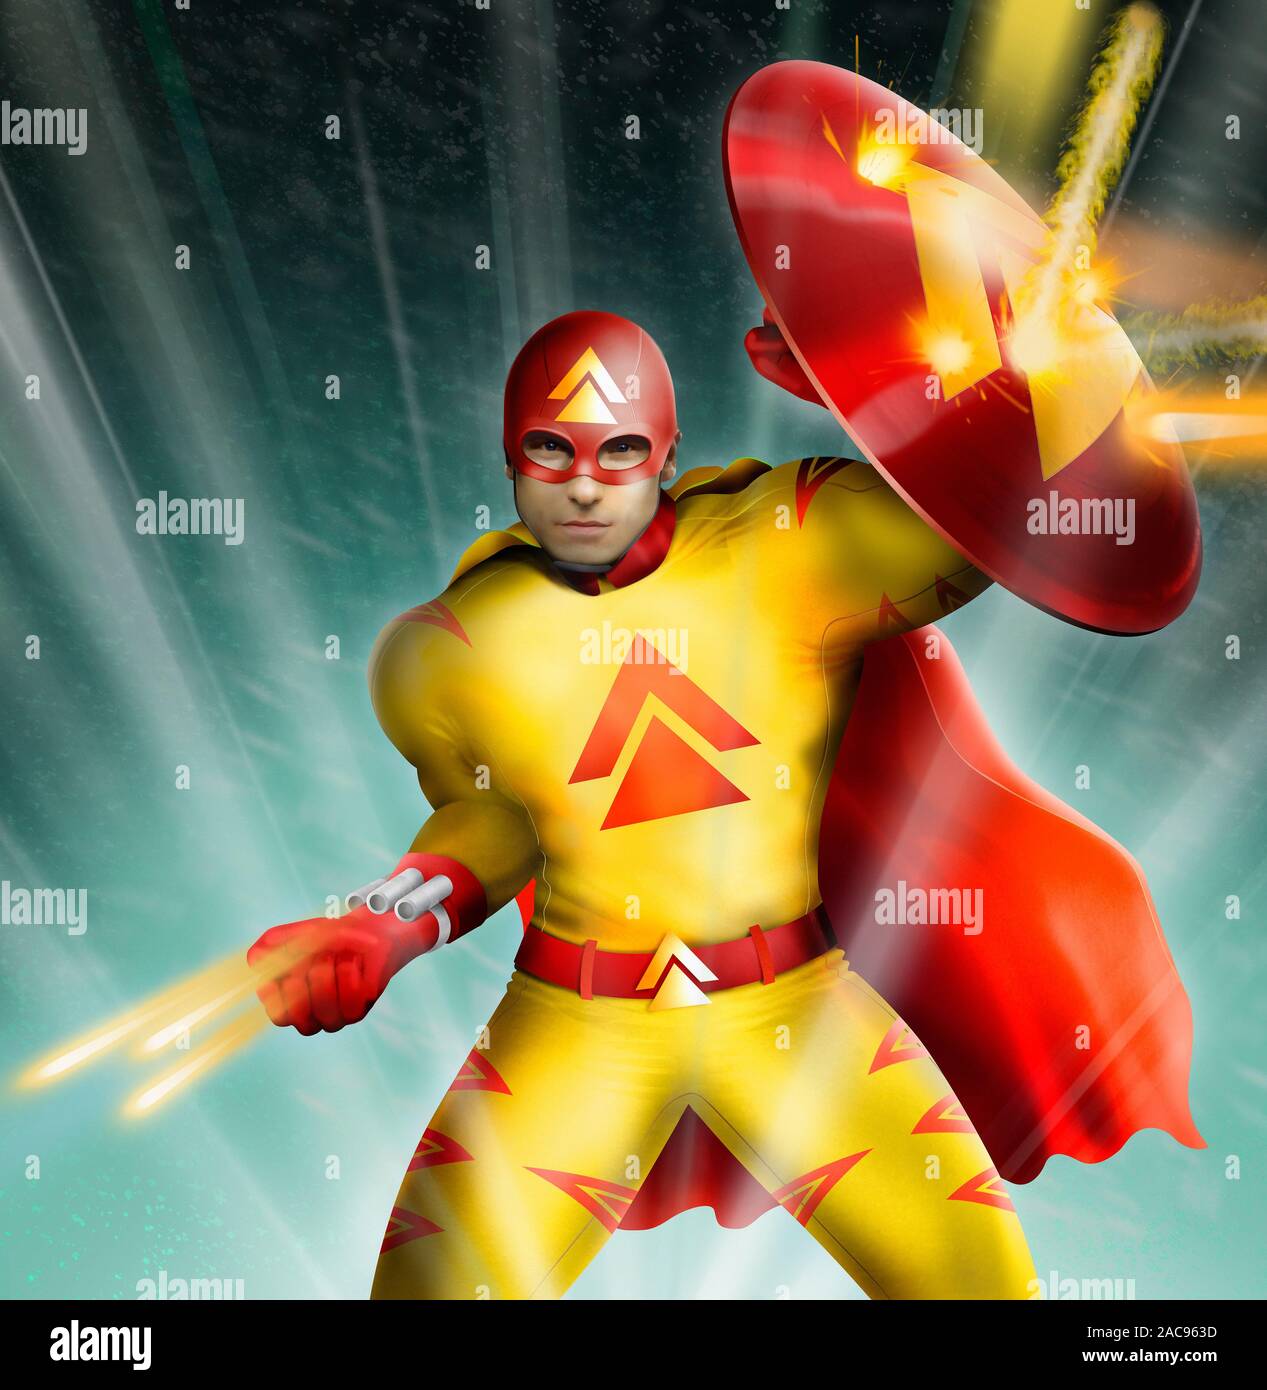 Science fiction superhero in fight with laser guns Stock Photo - Alamy